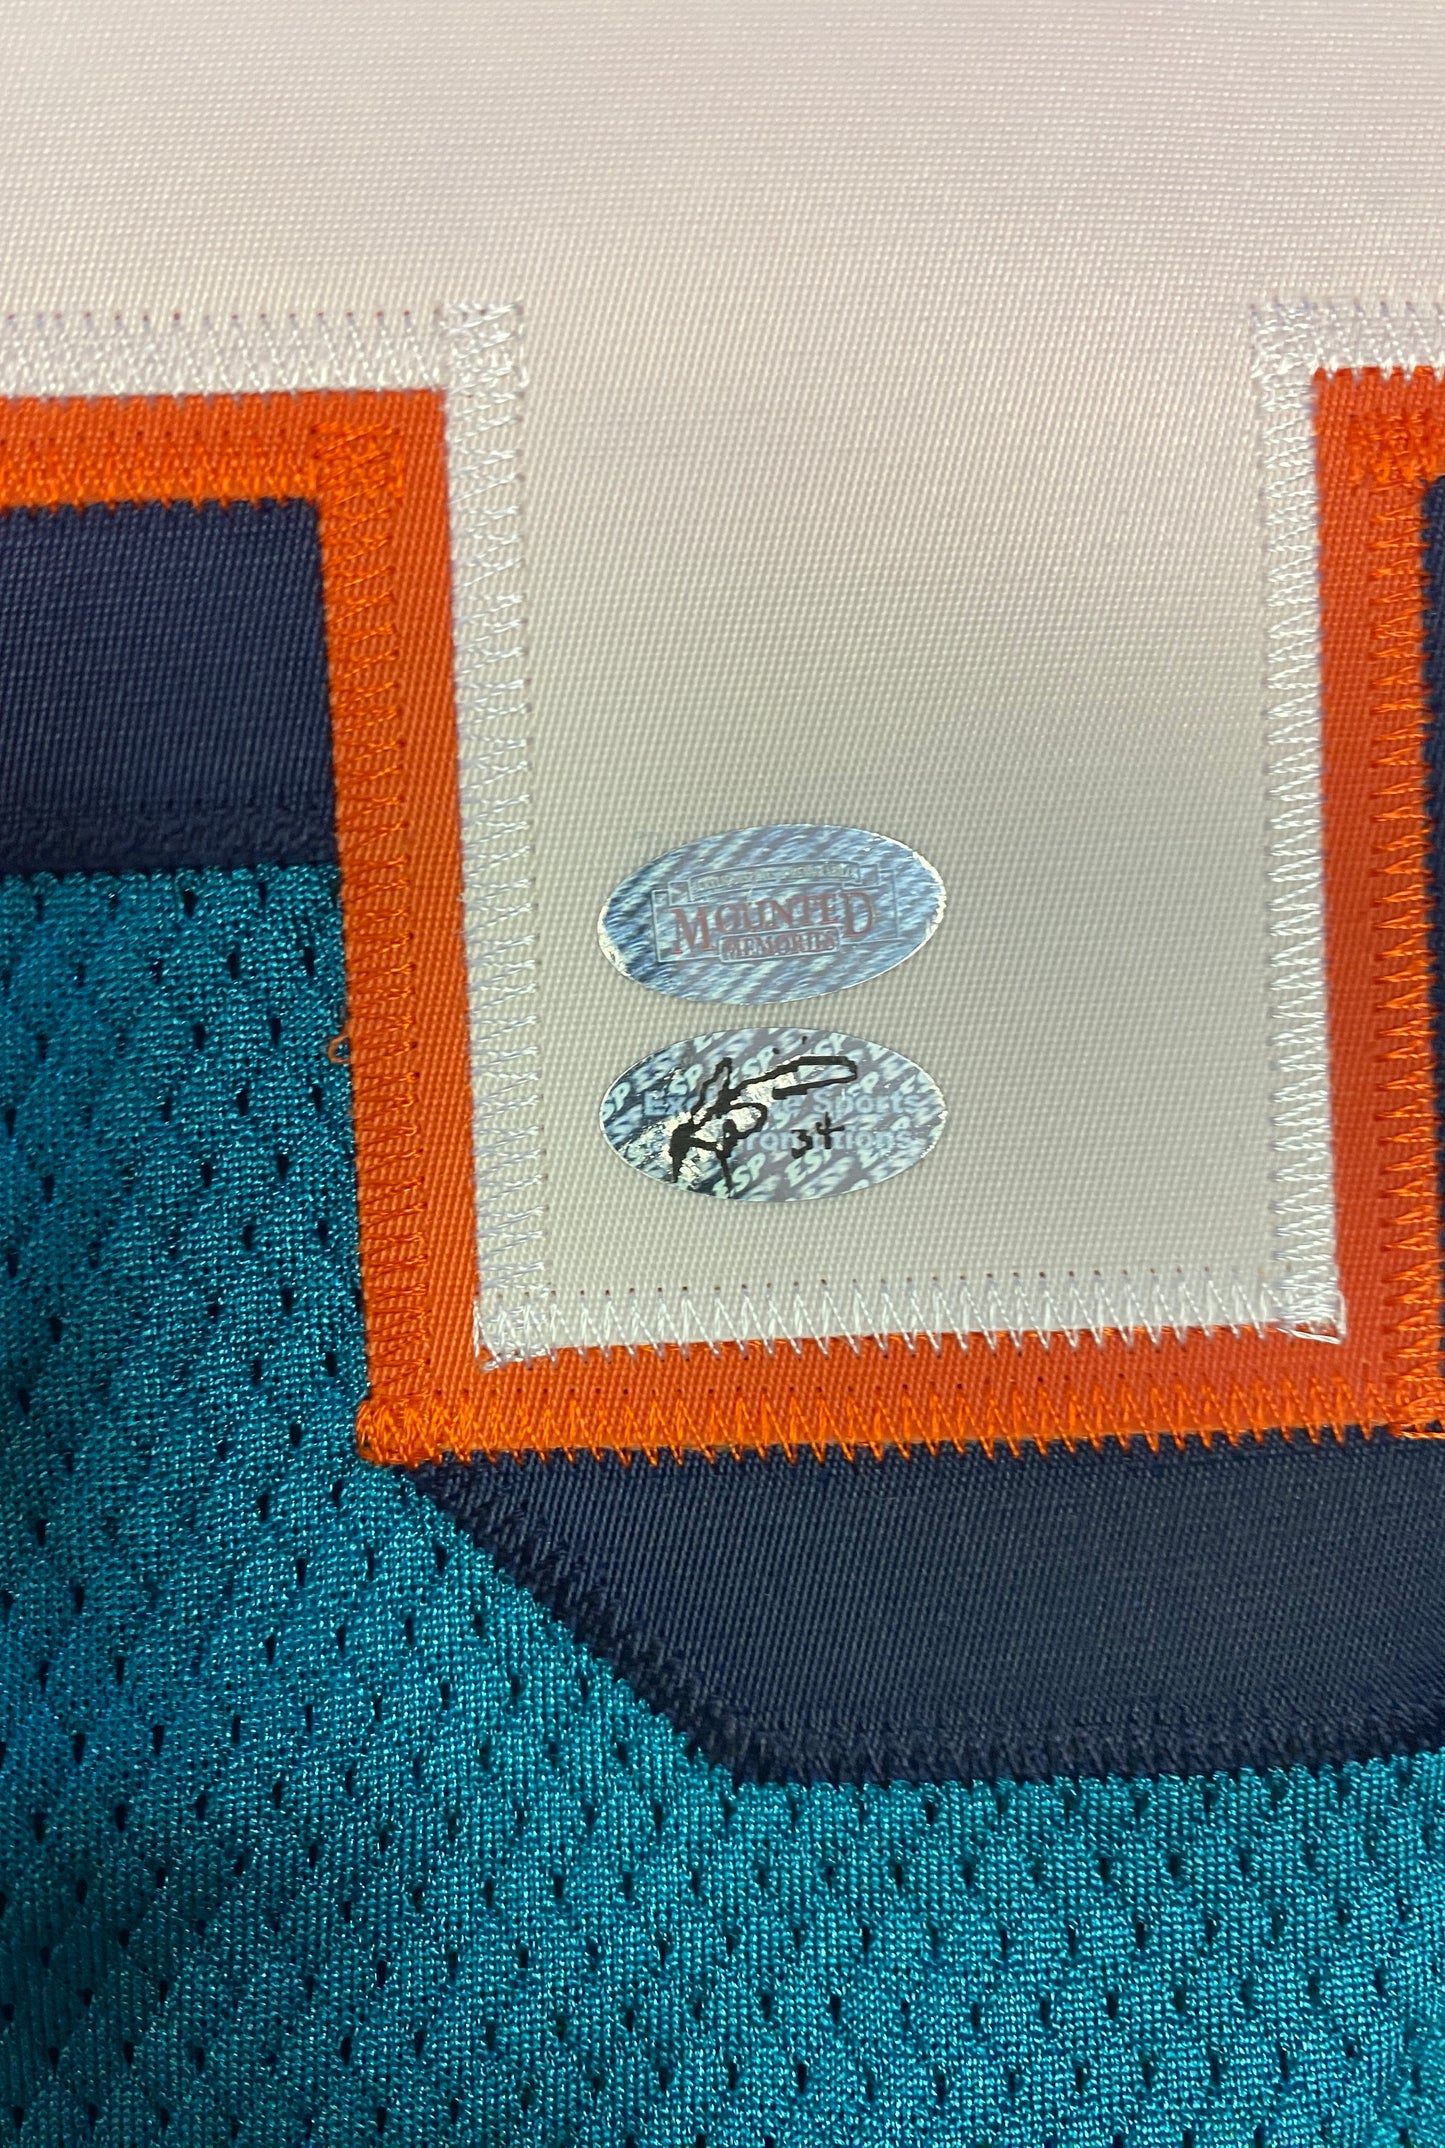 Ricky Williams Signed Miami Dolphins Jersey